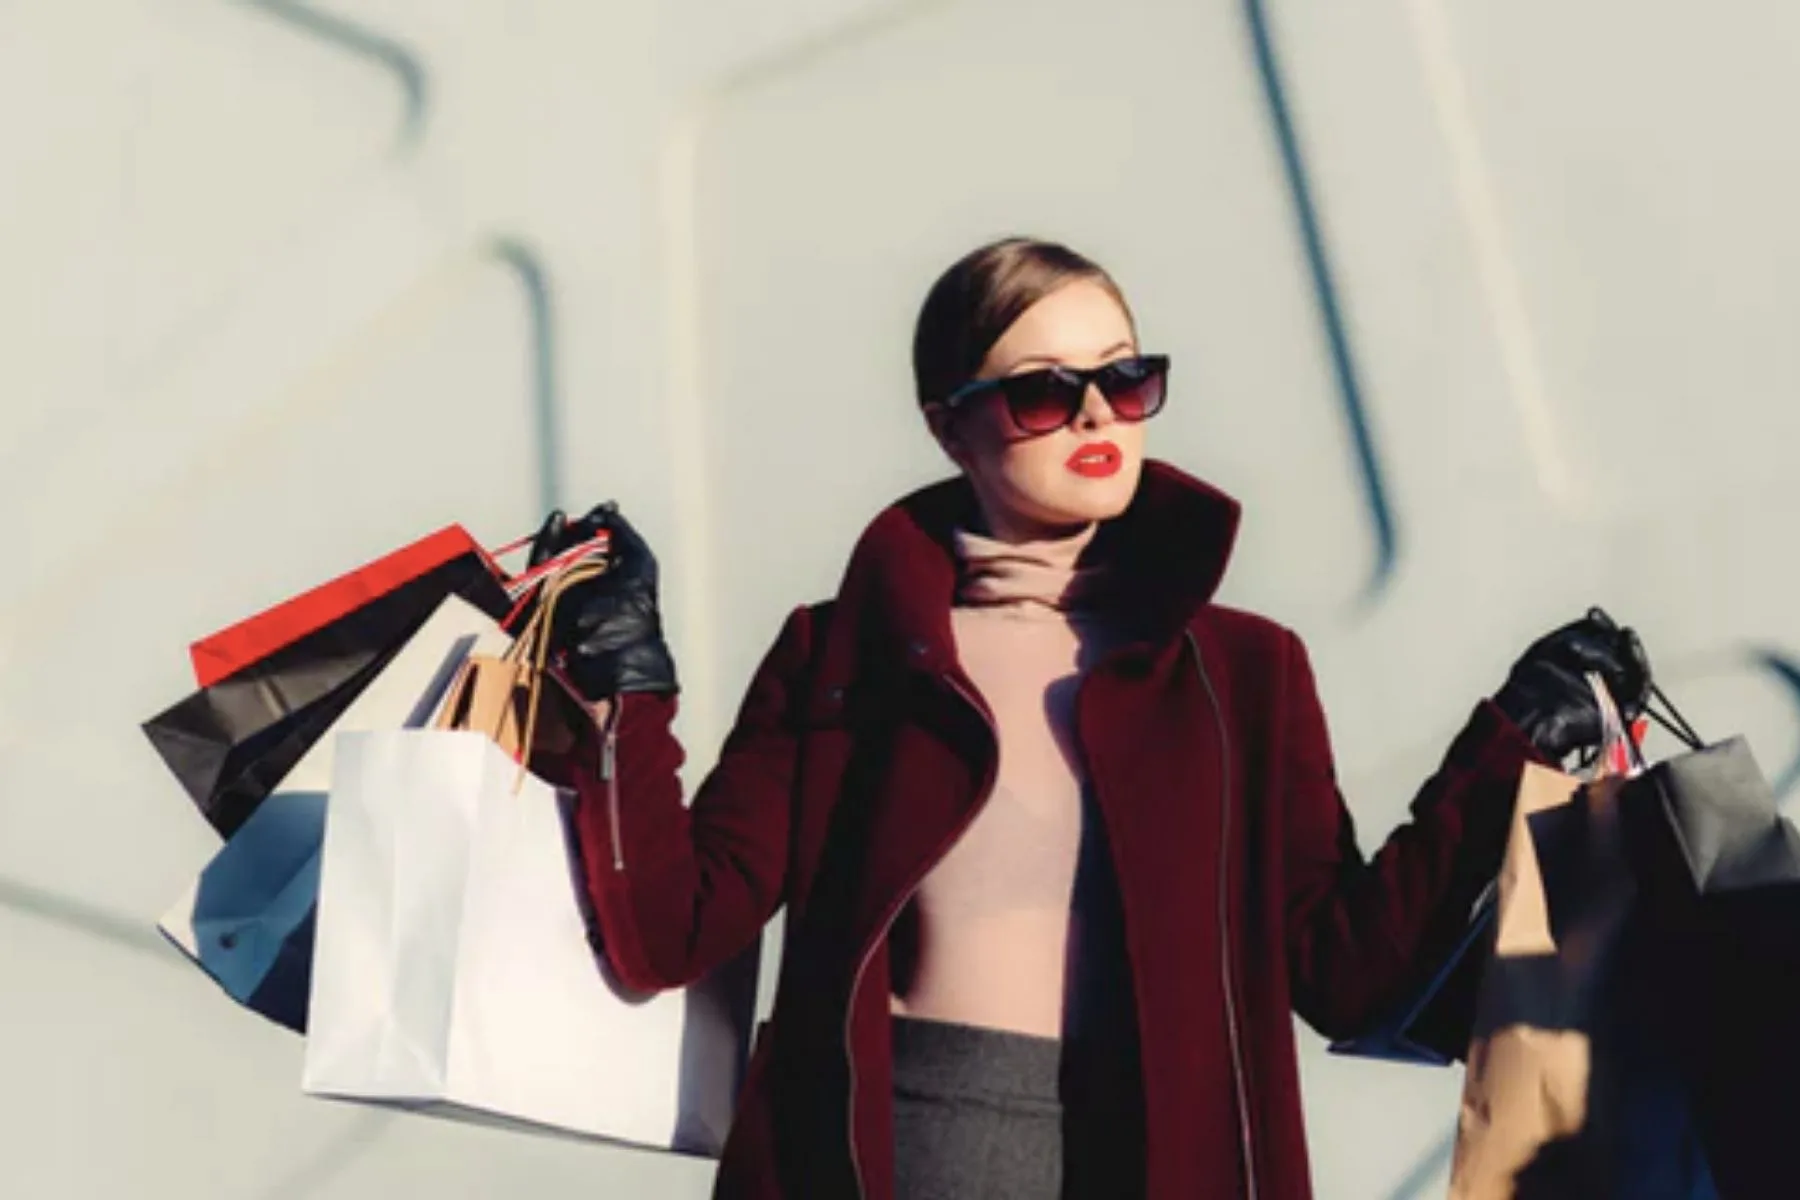 Woman in a red coat holding shopping bags